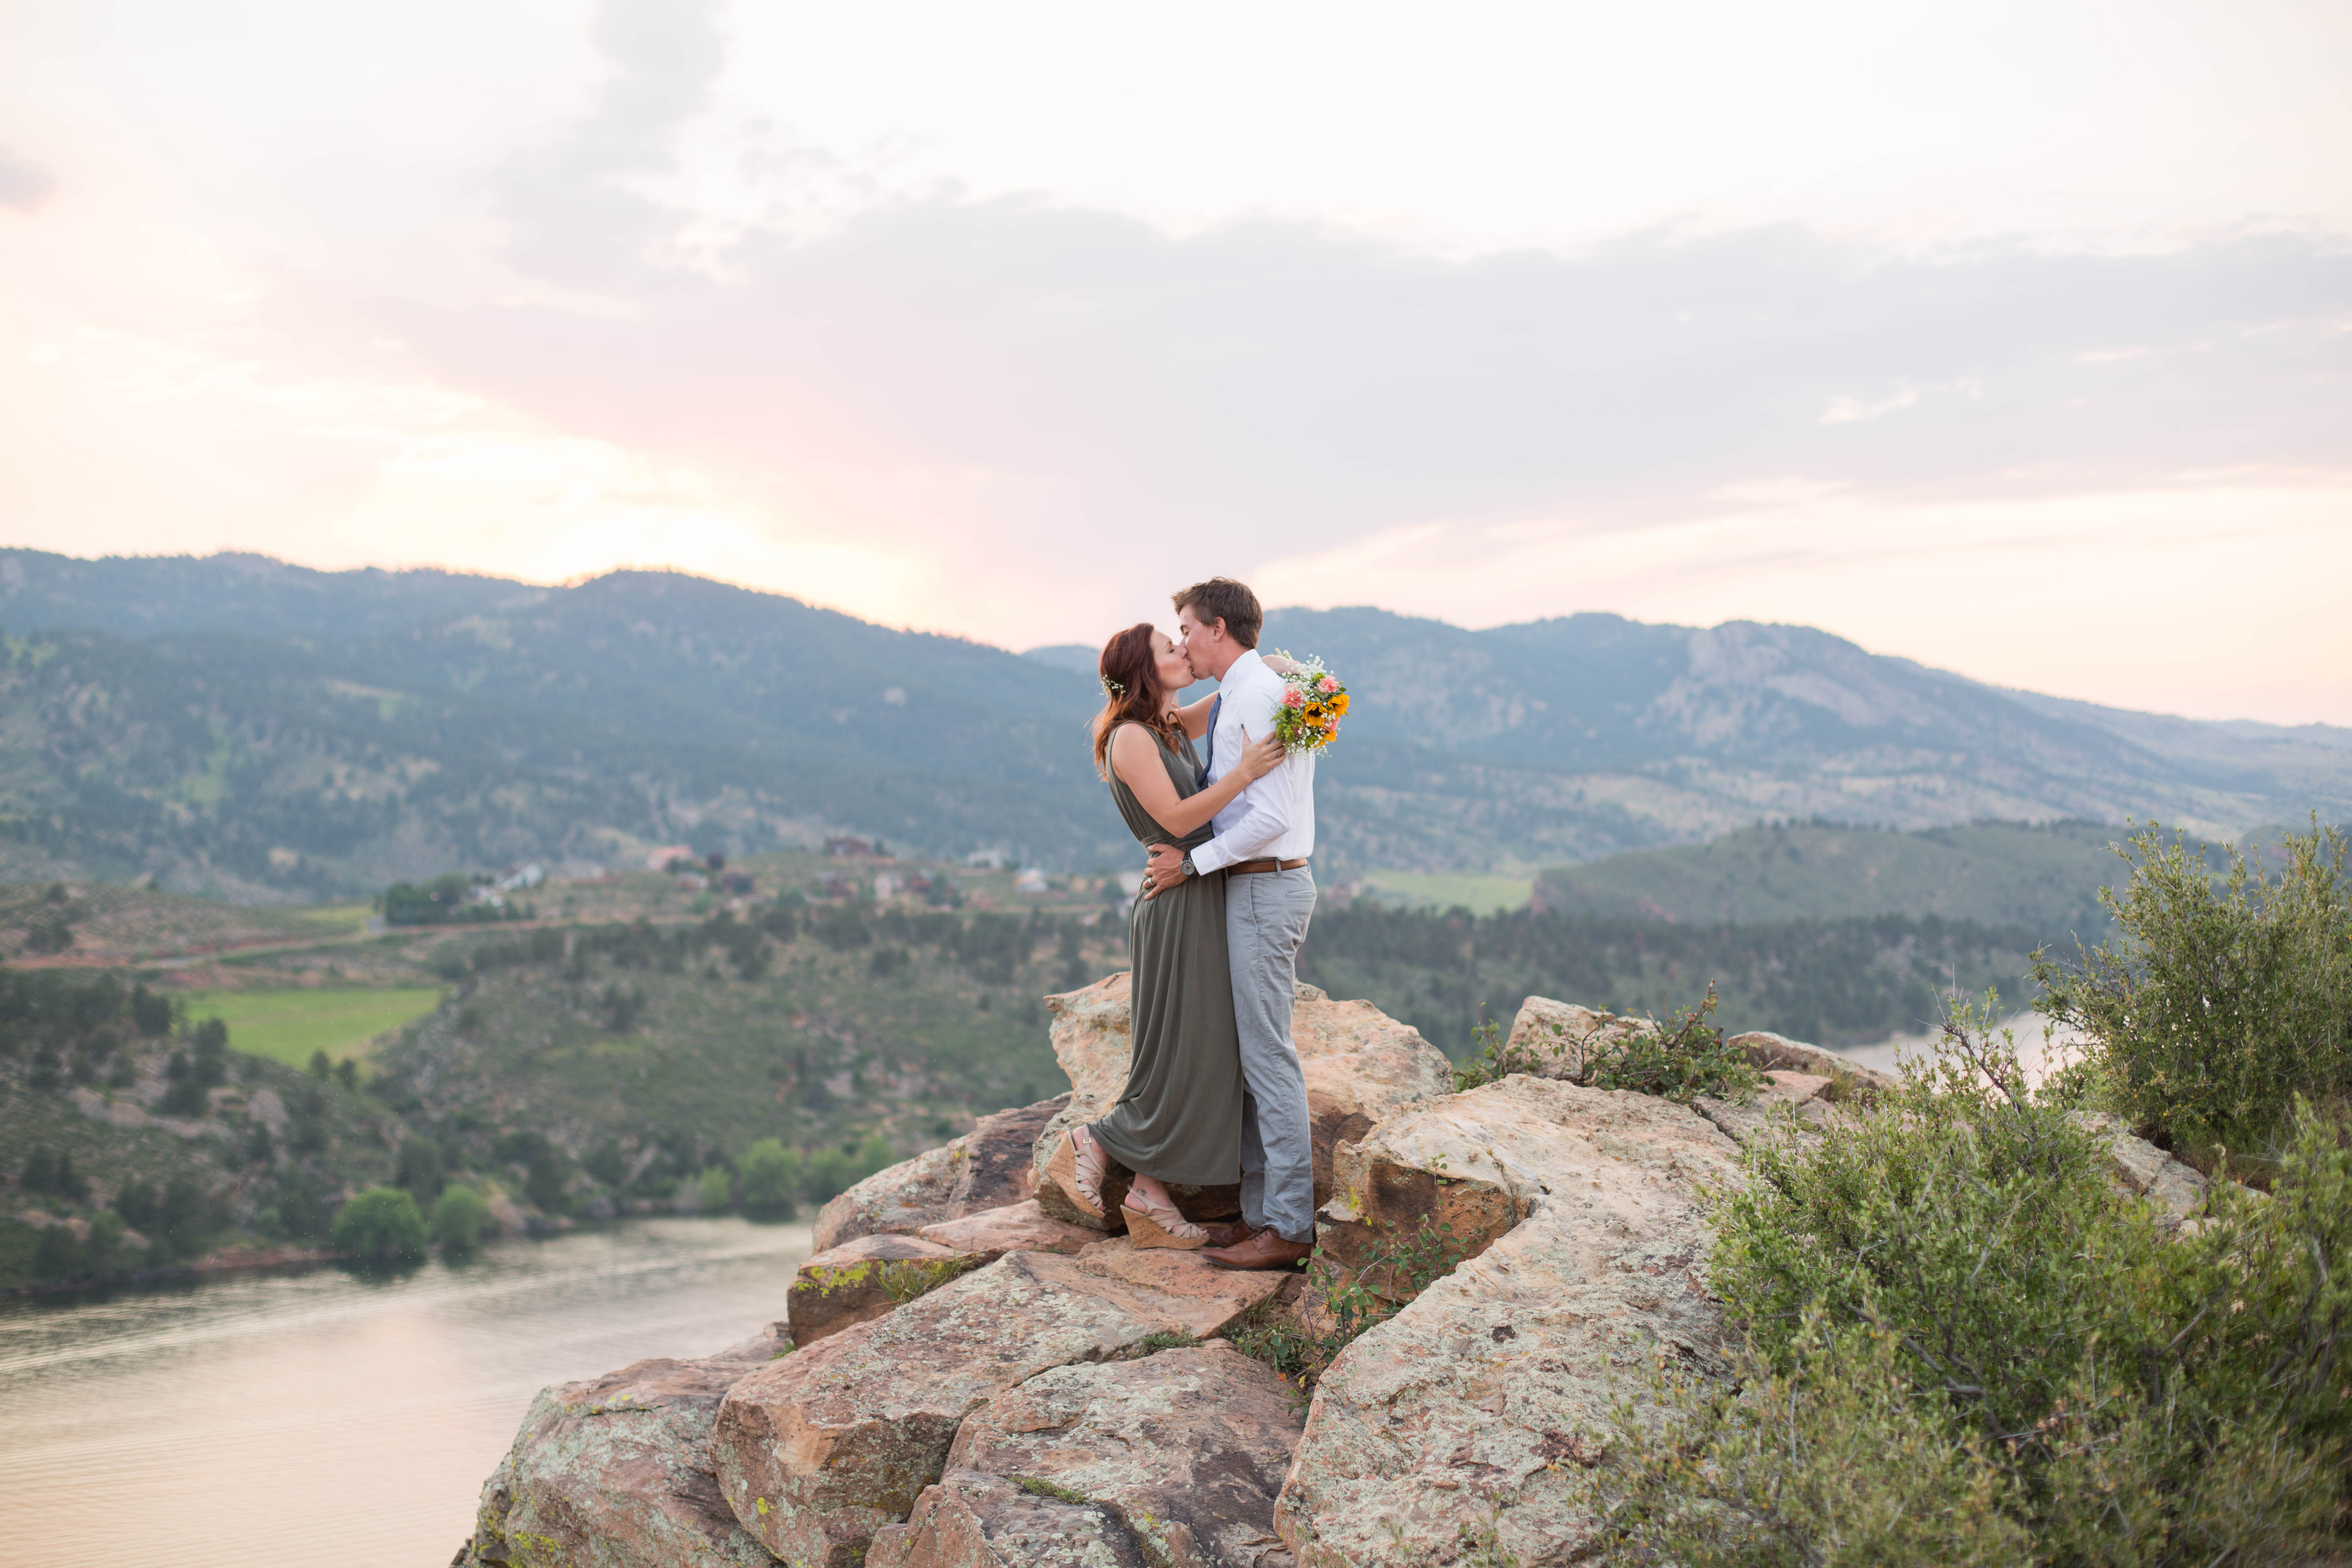 Sunset Colorado Engagement Session | Monica Brown Photography | monicabrownphoto.com